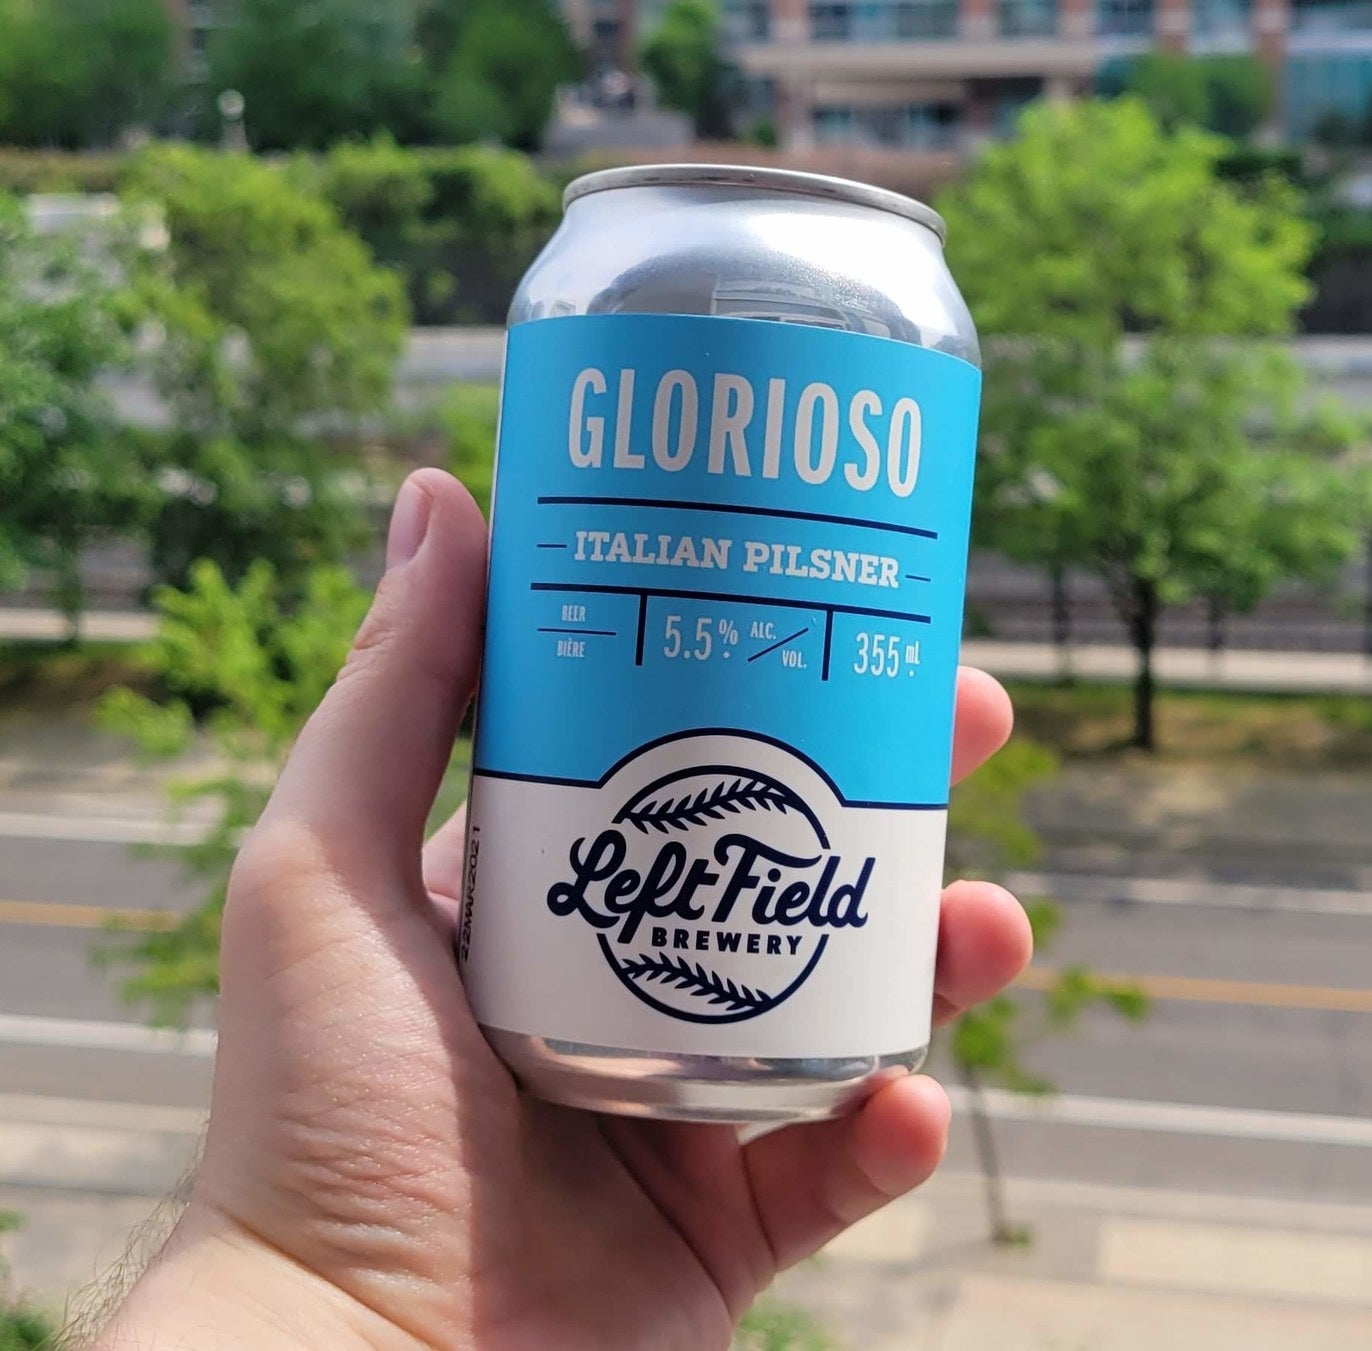 A can of Glorioso being held in a hand.